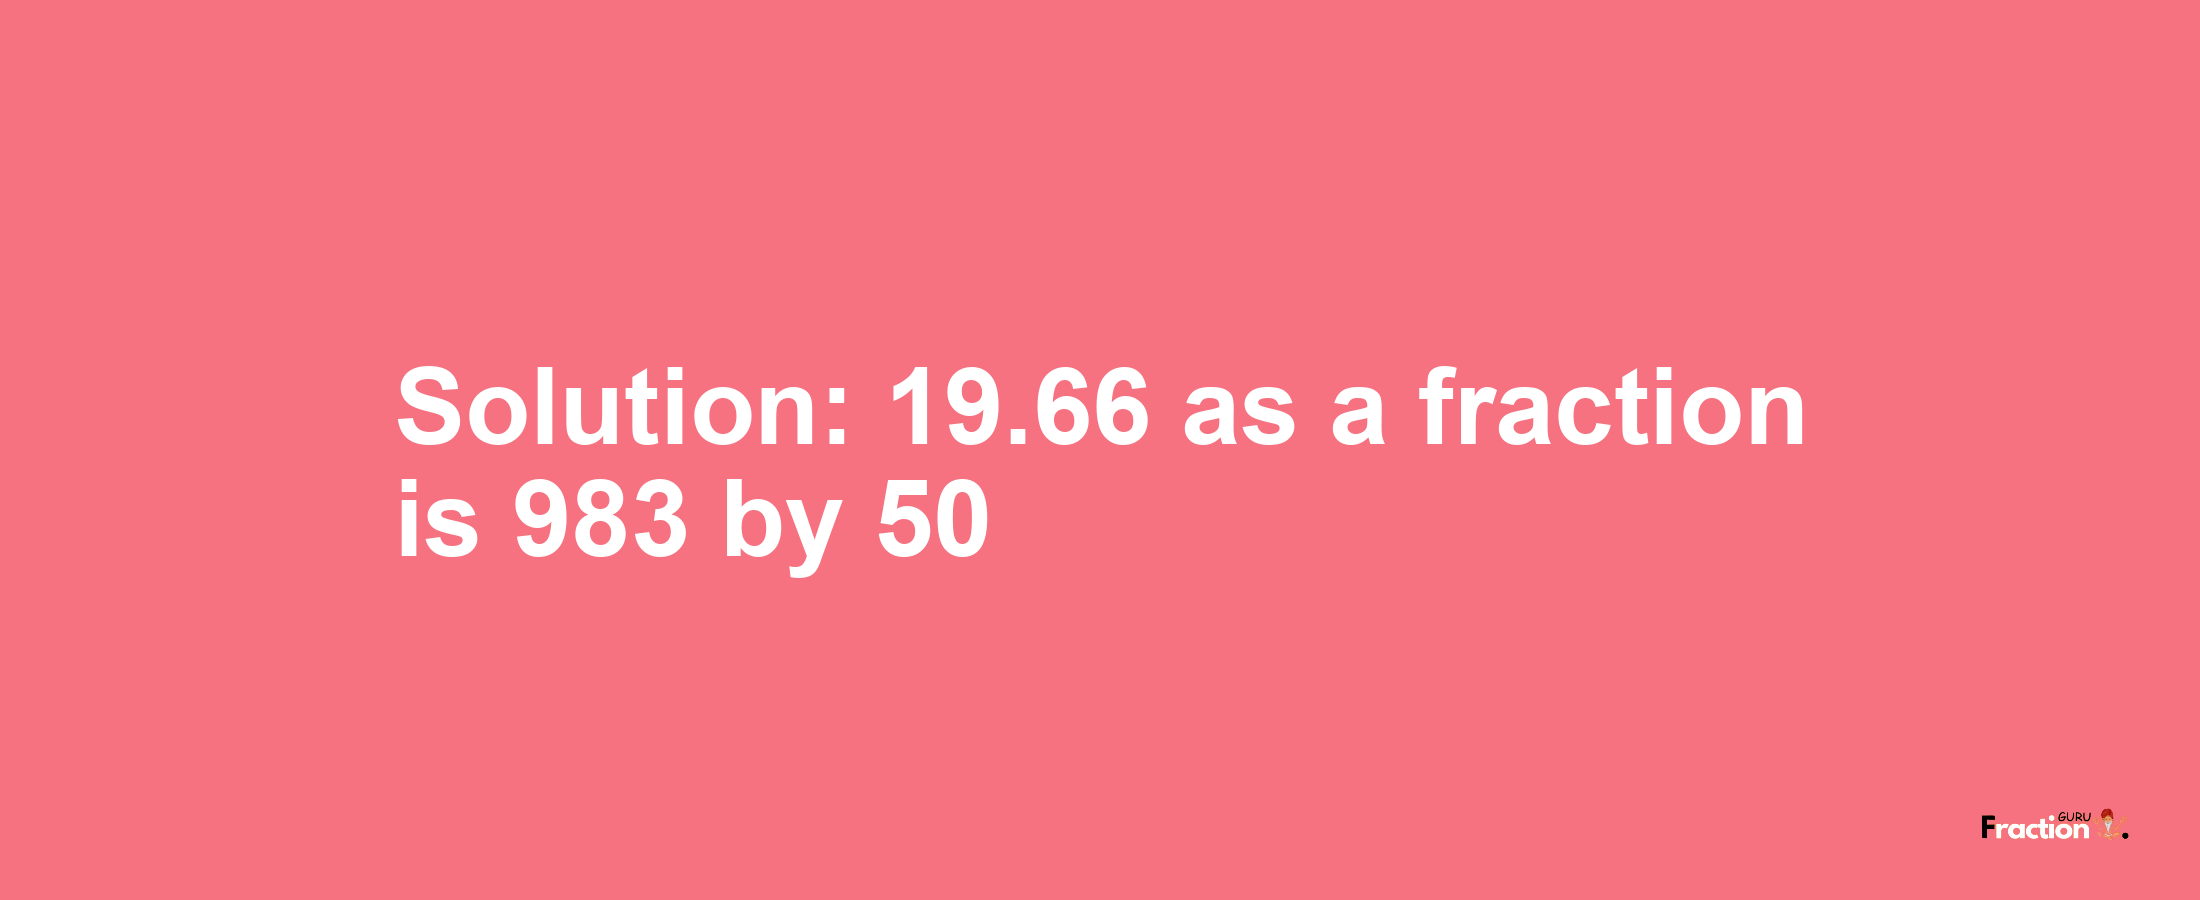 Solution:19.66 as a fraction is 983/50